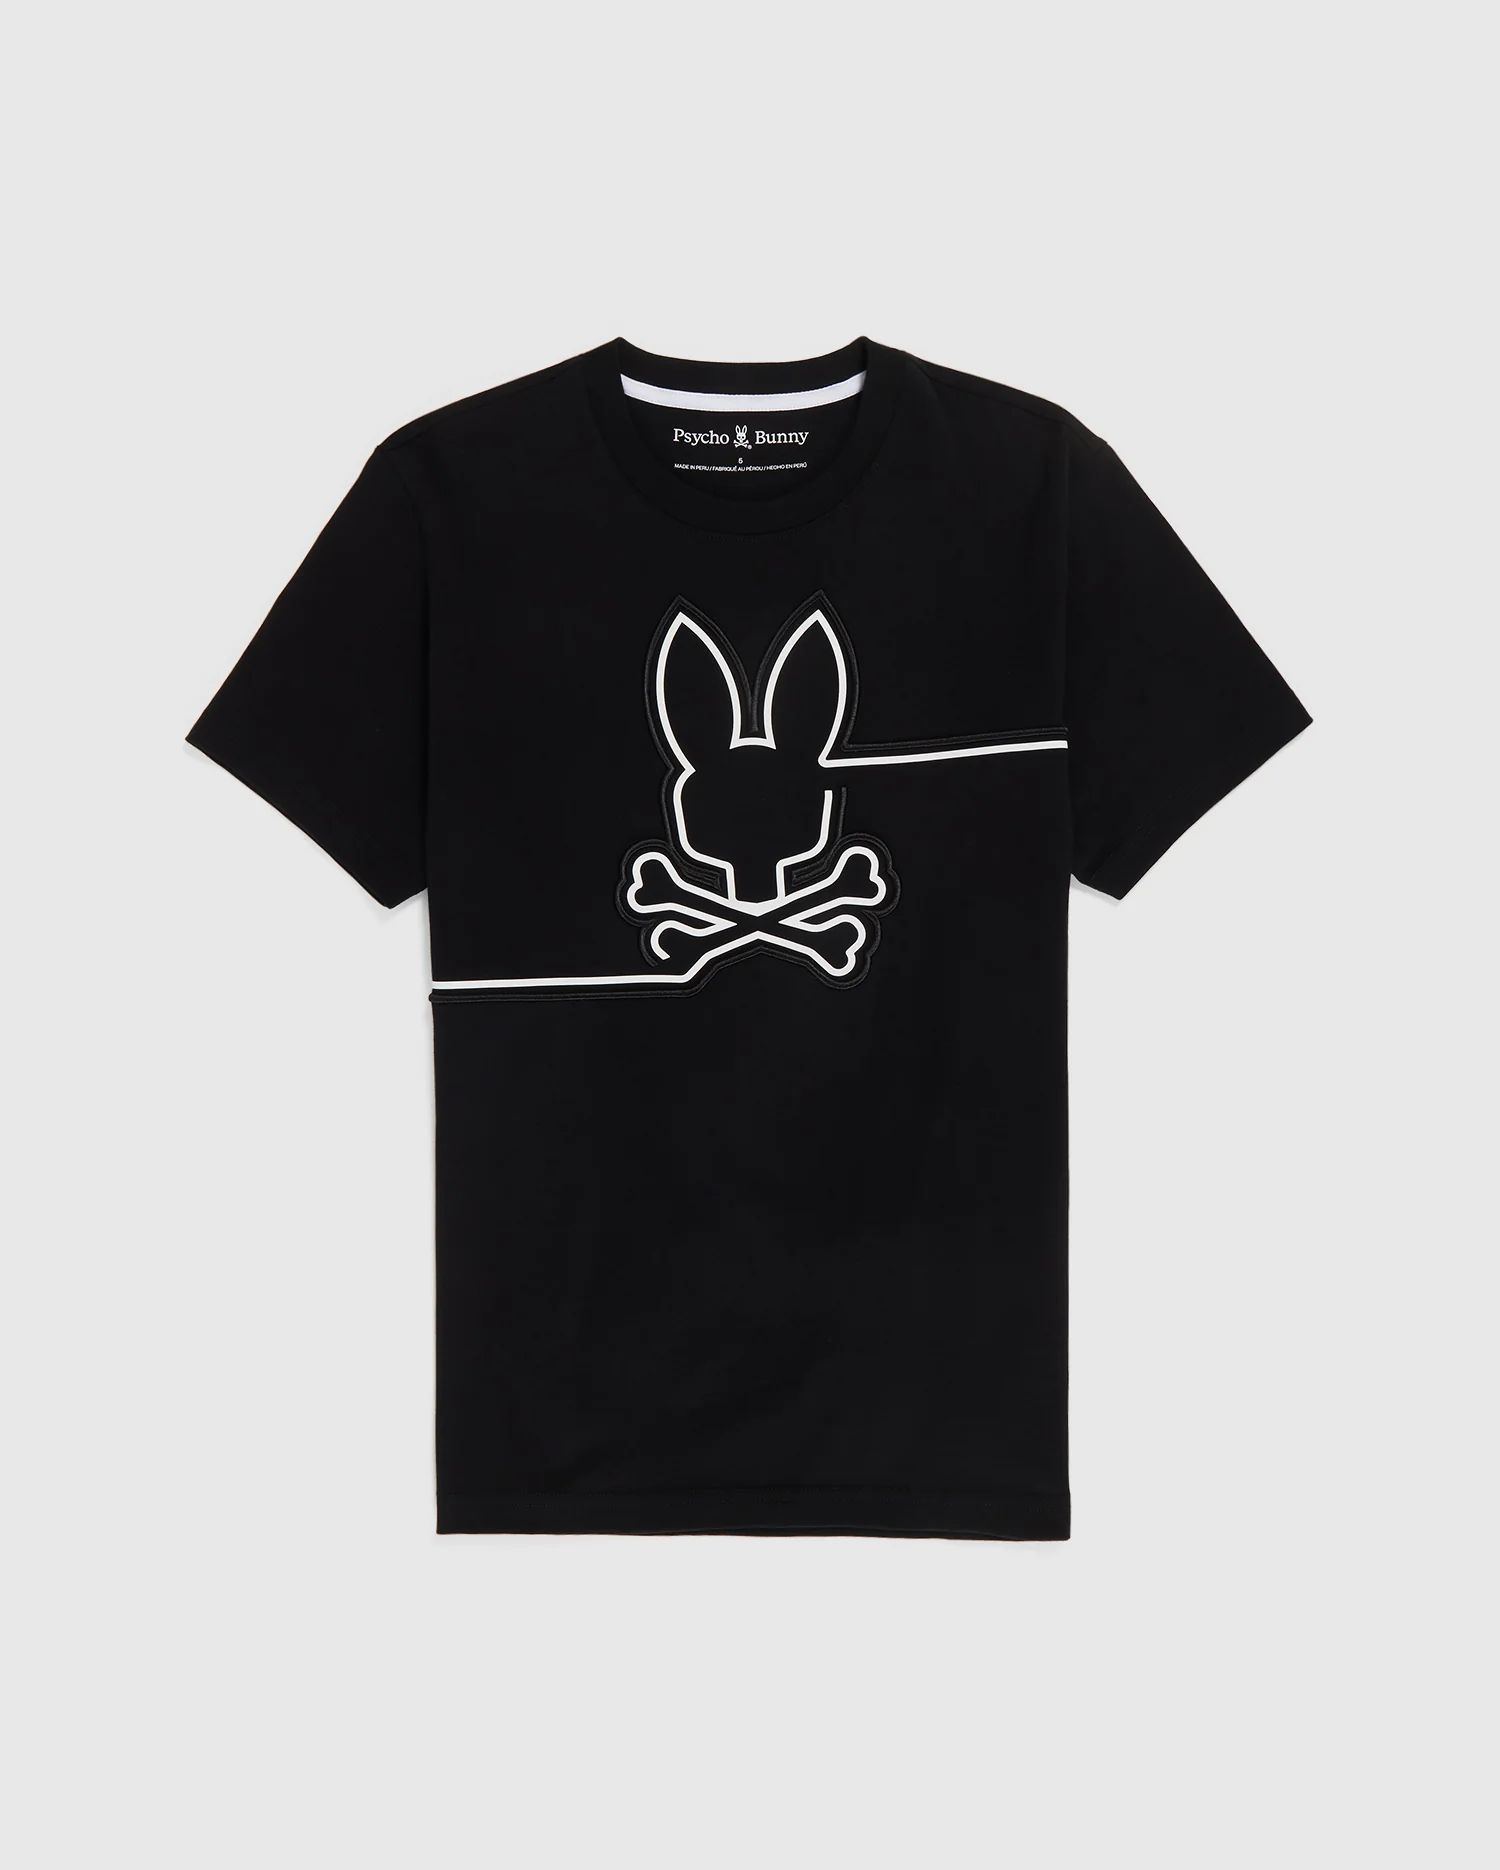 MENS BLACK CHESTER EMBROIDERED GRAPHIC TEE | PSYCHO BUNNY | Psycho Bunny